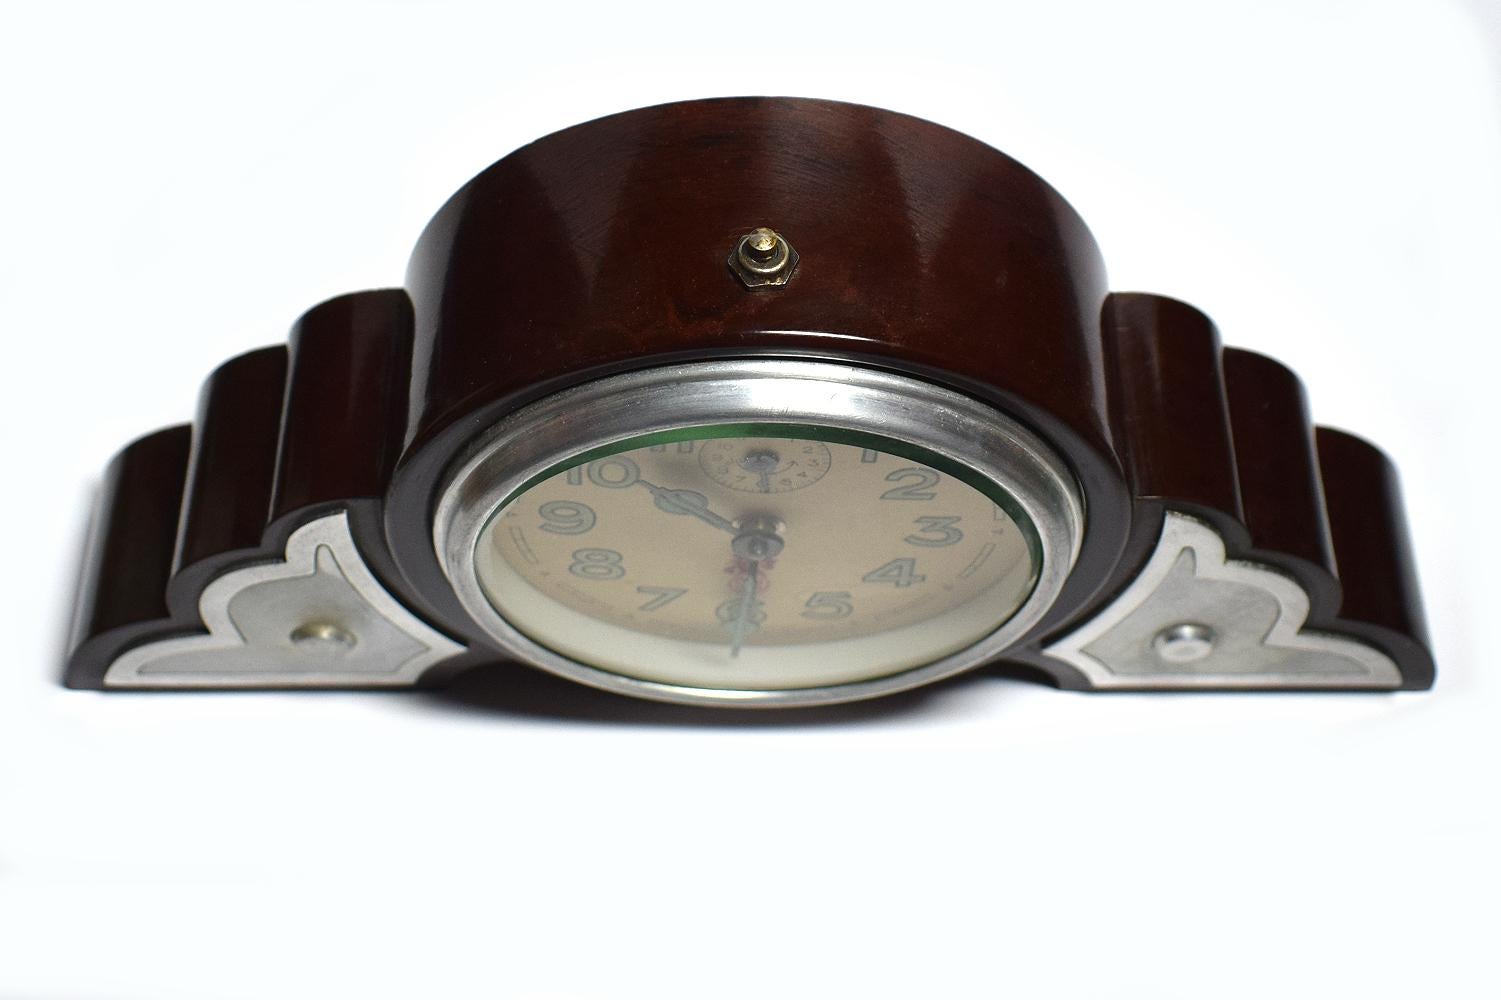 Very attractive 1930s Art Deco brown colored bakelite clock. Originating from France this wonderful clock is the epitome of Art Deco with its fabulous cloud shaped case. The clock works well and keeps good time having been recently serviced.